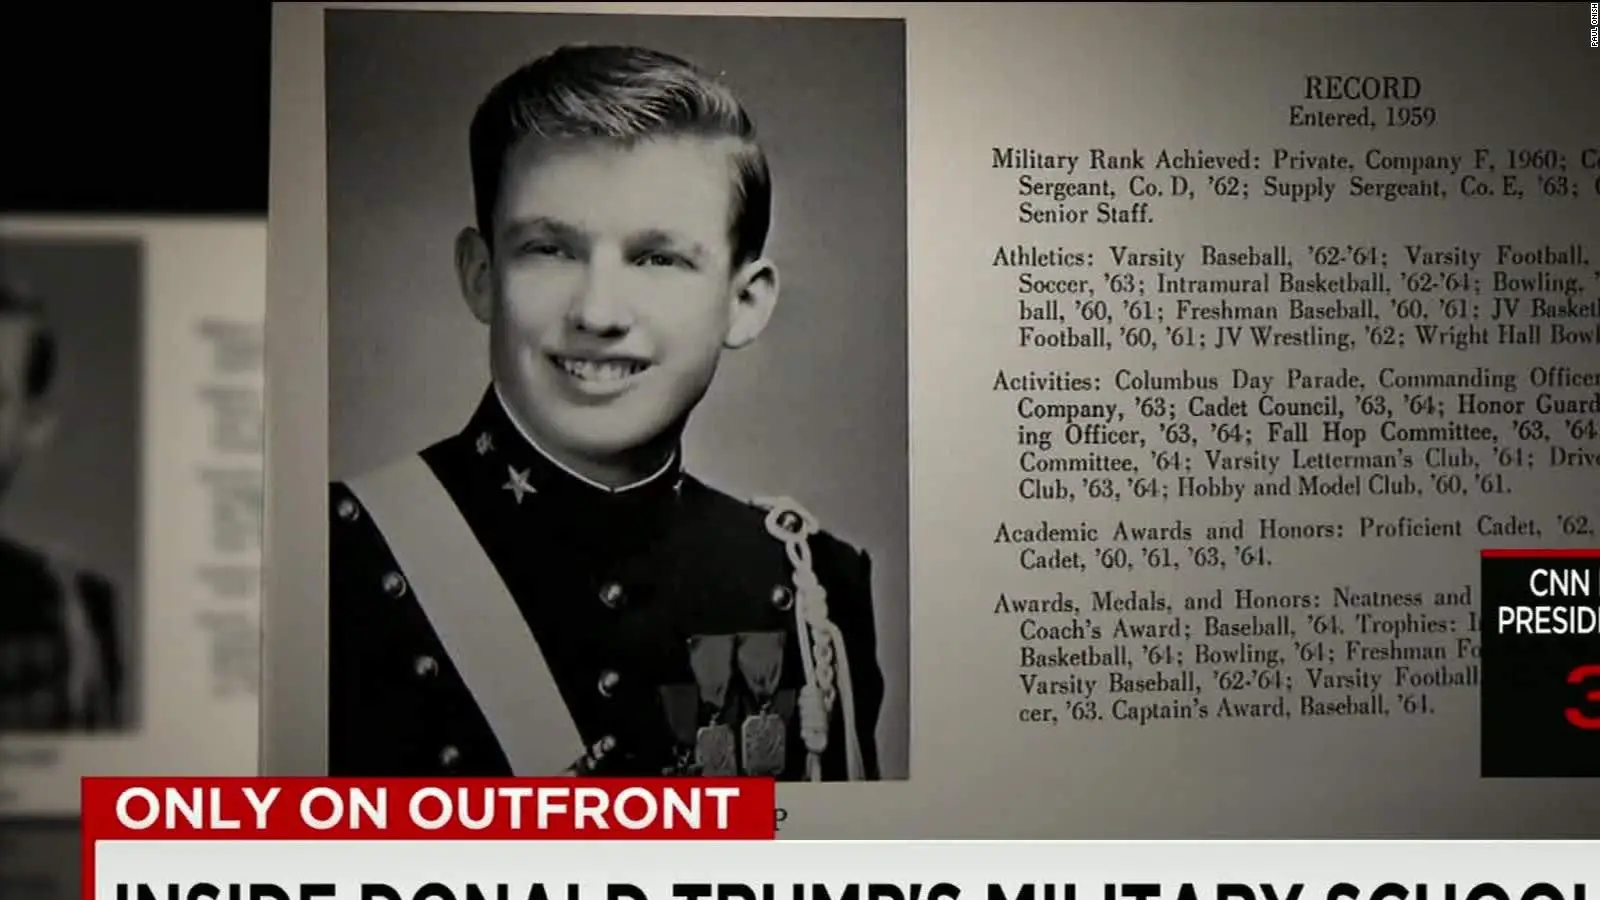 What is the Trump Family Legacy in military service?